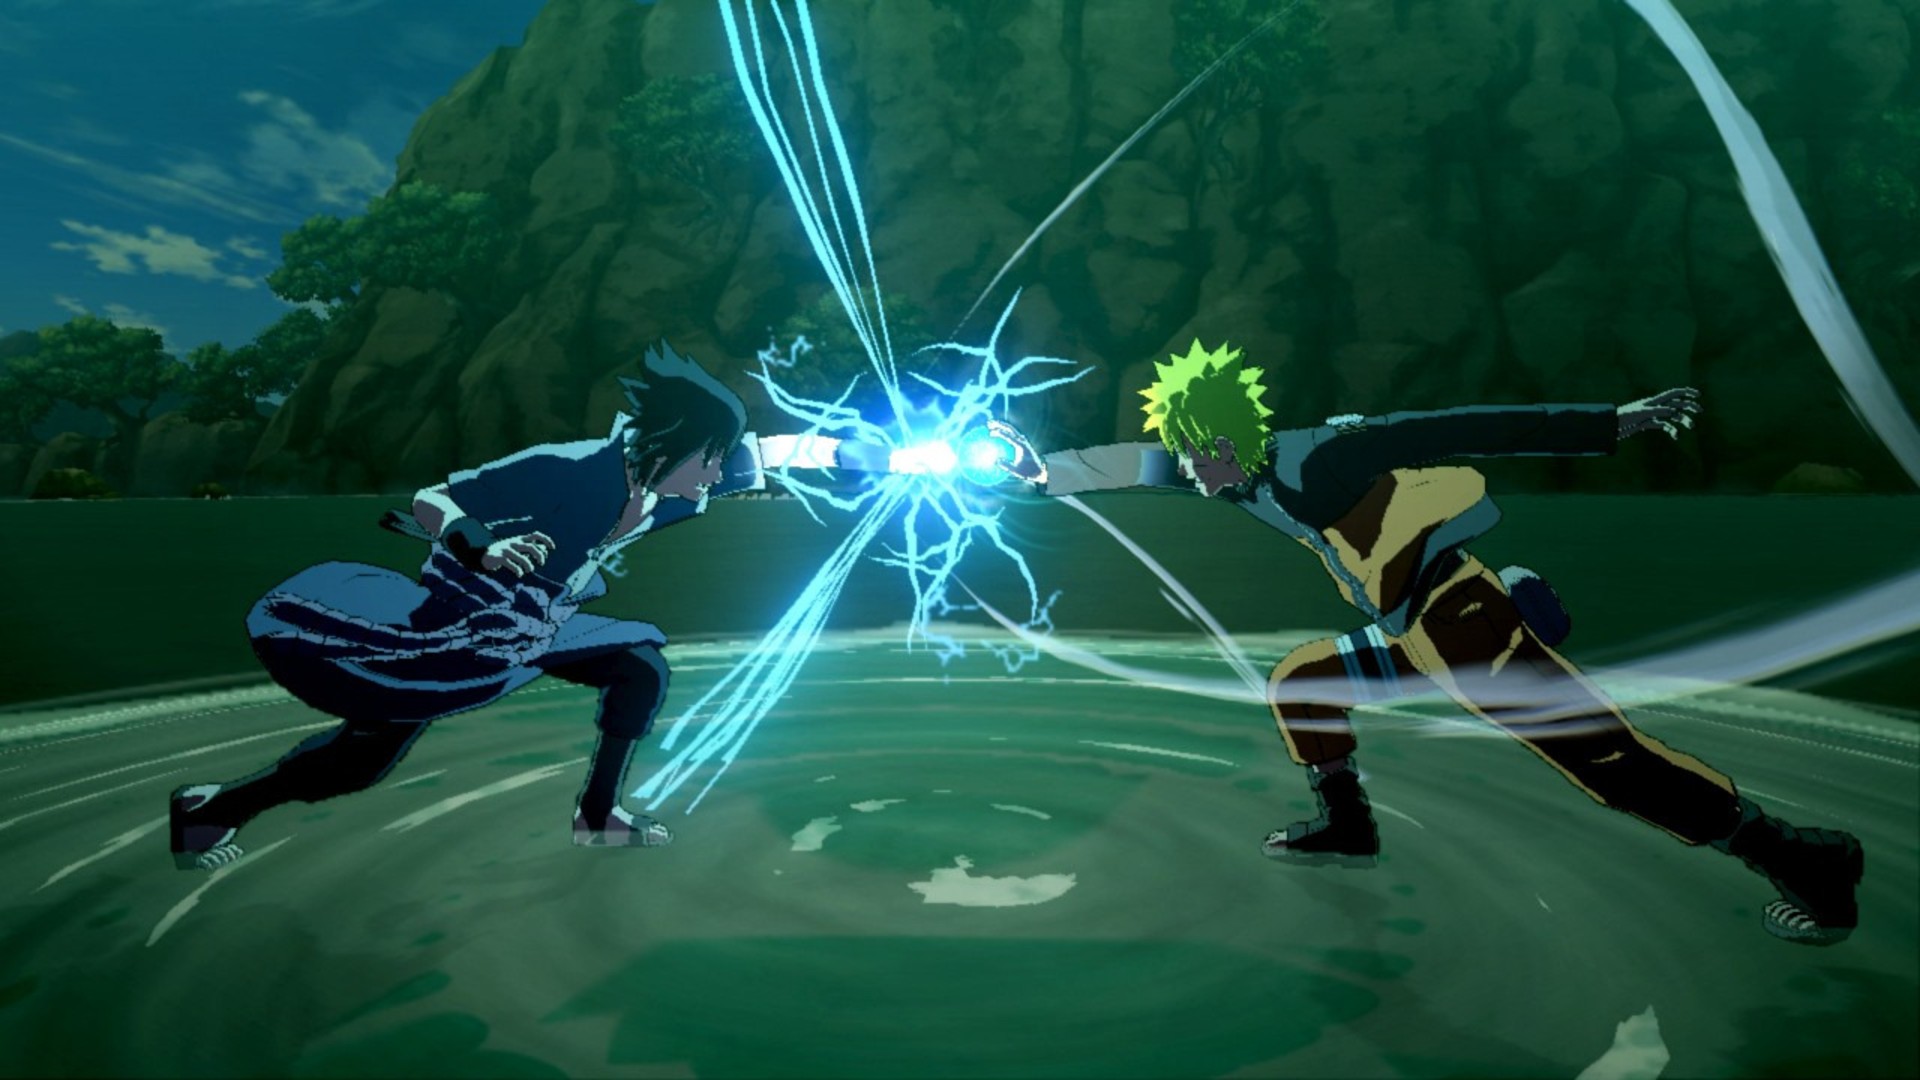 Best anime games: Naruto Shippuden: Ultimate Ninja Storm 3 Full Burst. Image shows two fighter whose fists have collided and generated electricity.